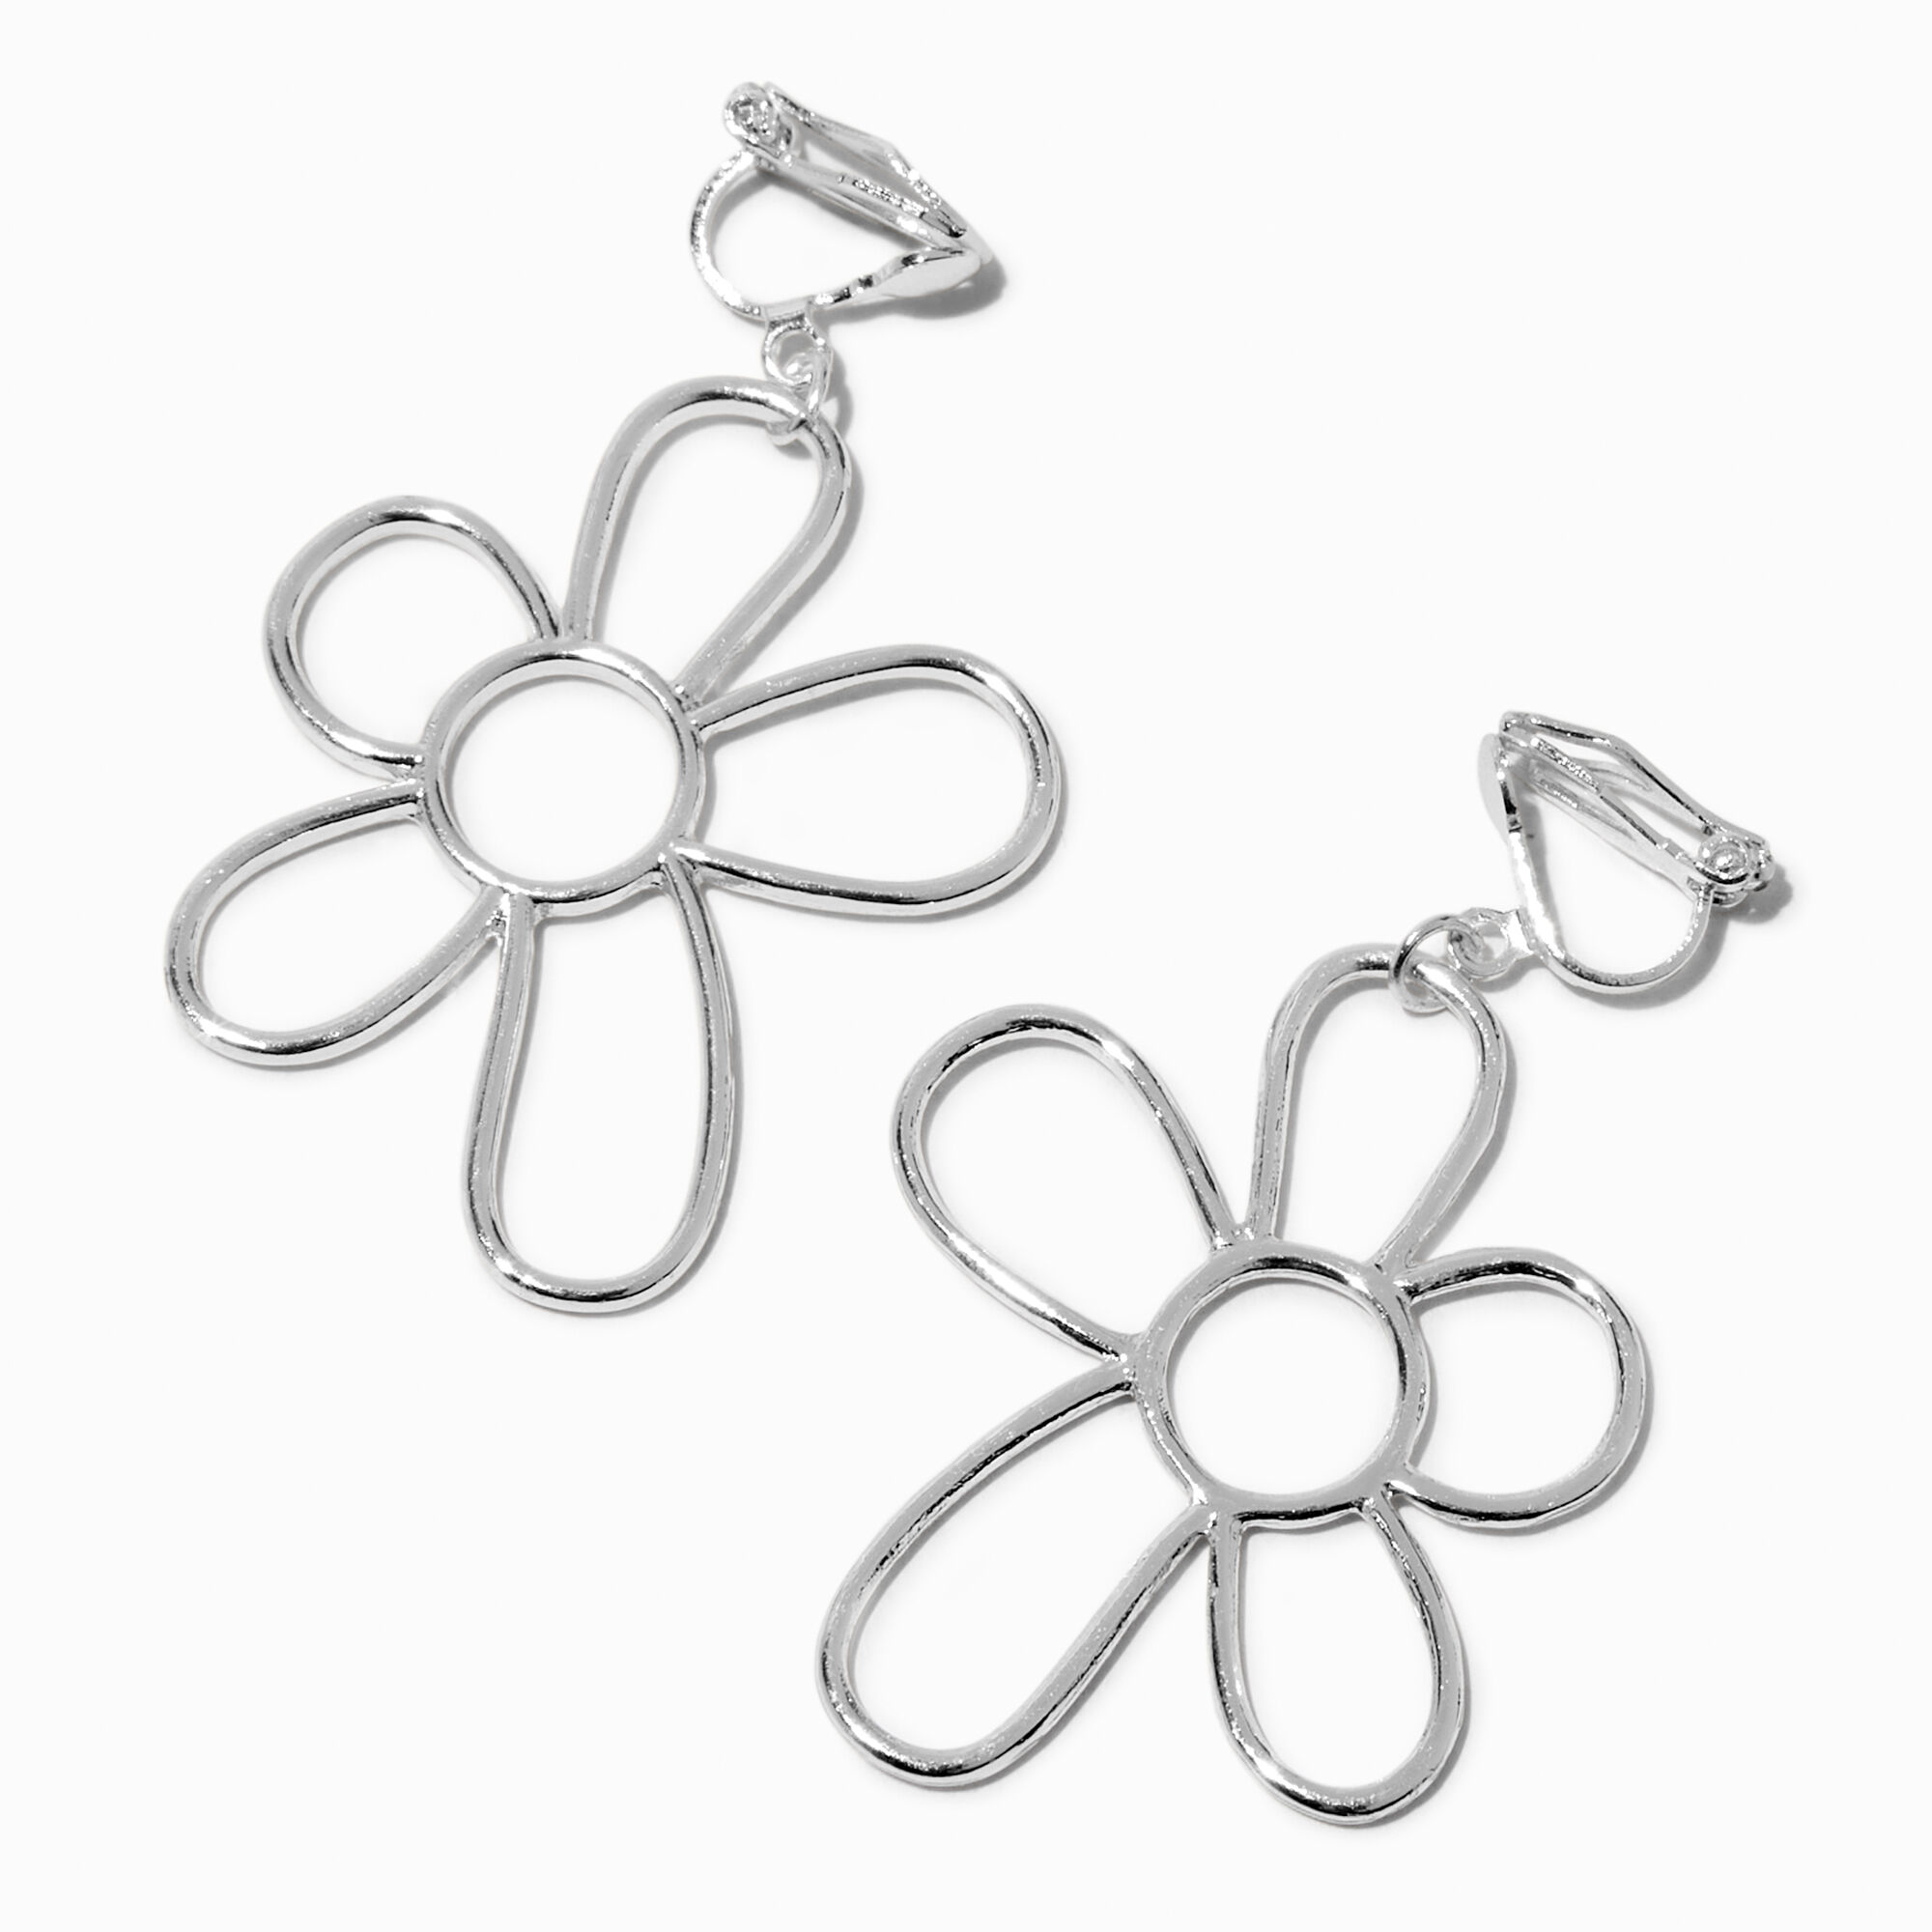 View Claires Tone Daisy Outline 15 ClipOn Drop Earrings Silver information